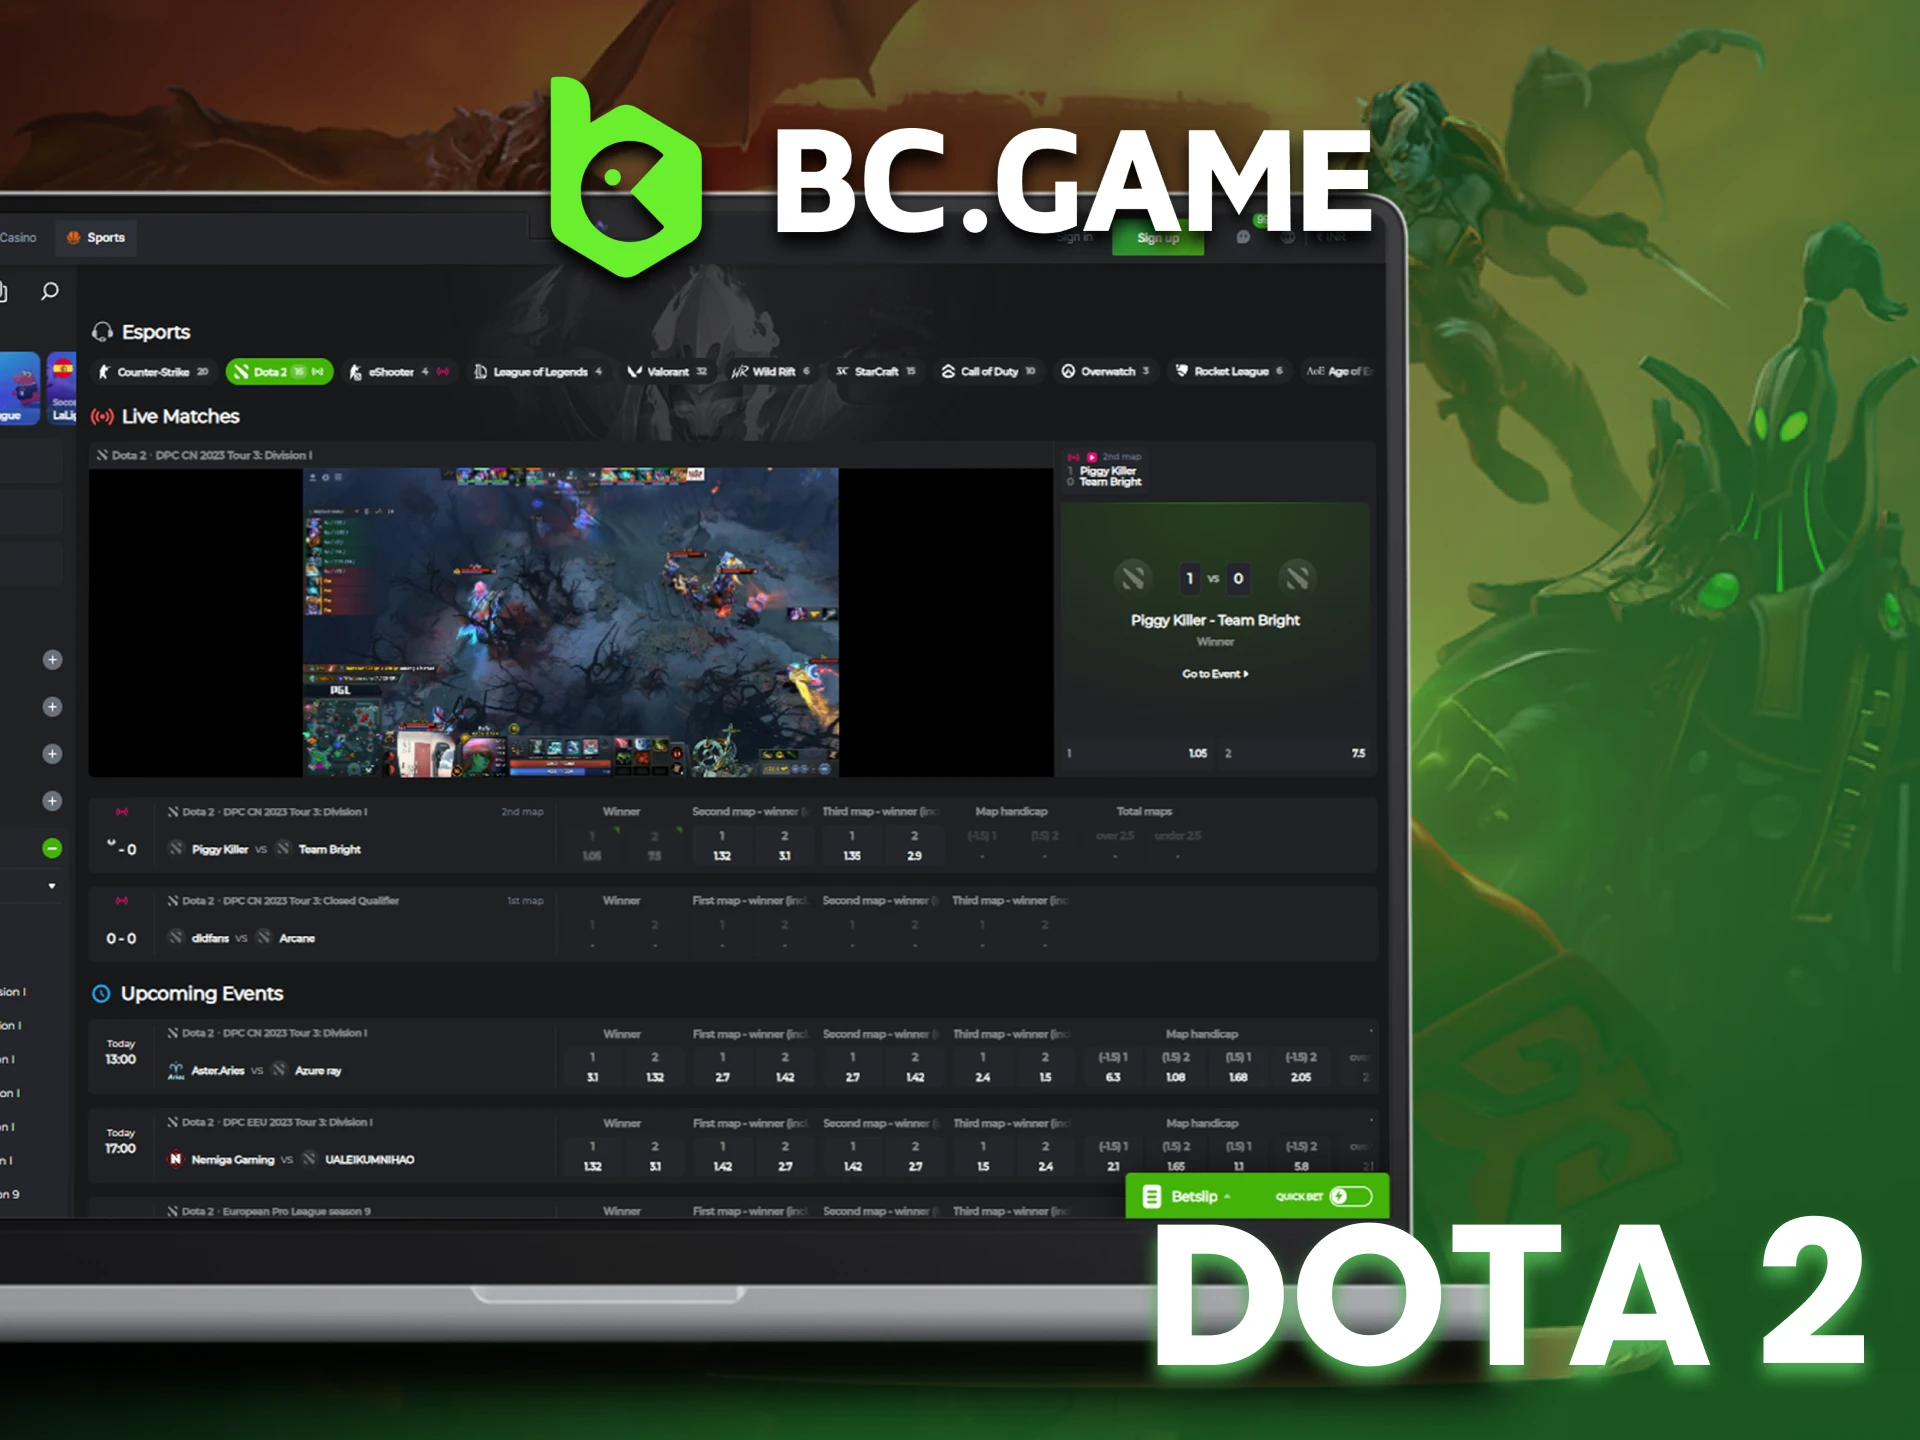 Bet on Dota 2 matches and watch them in live at BC Game.